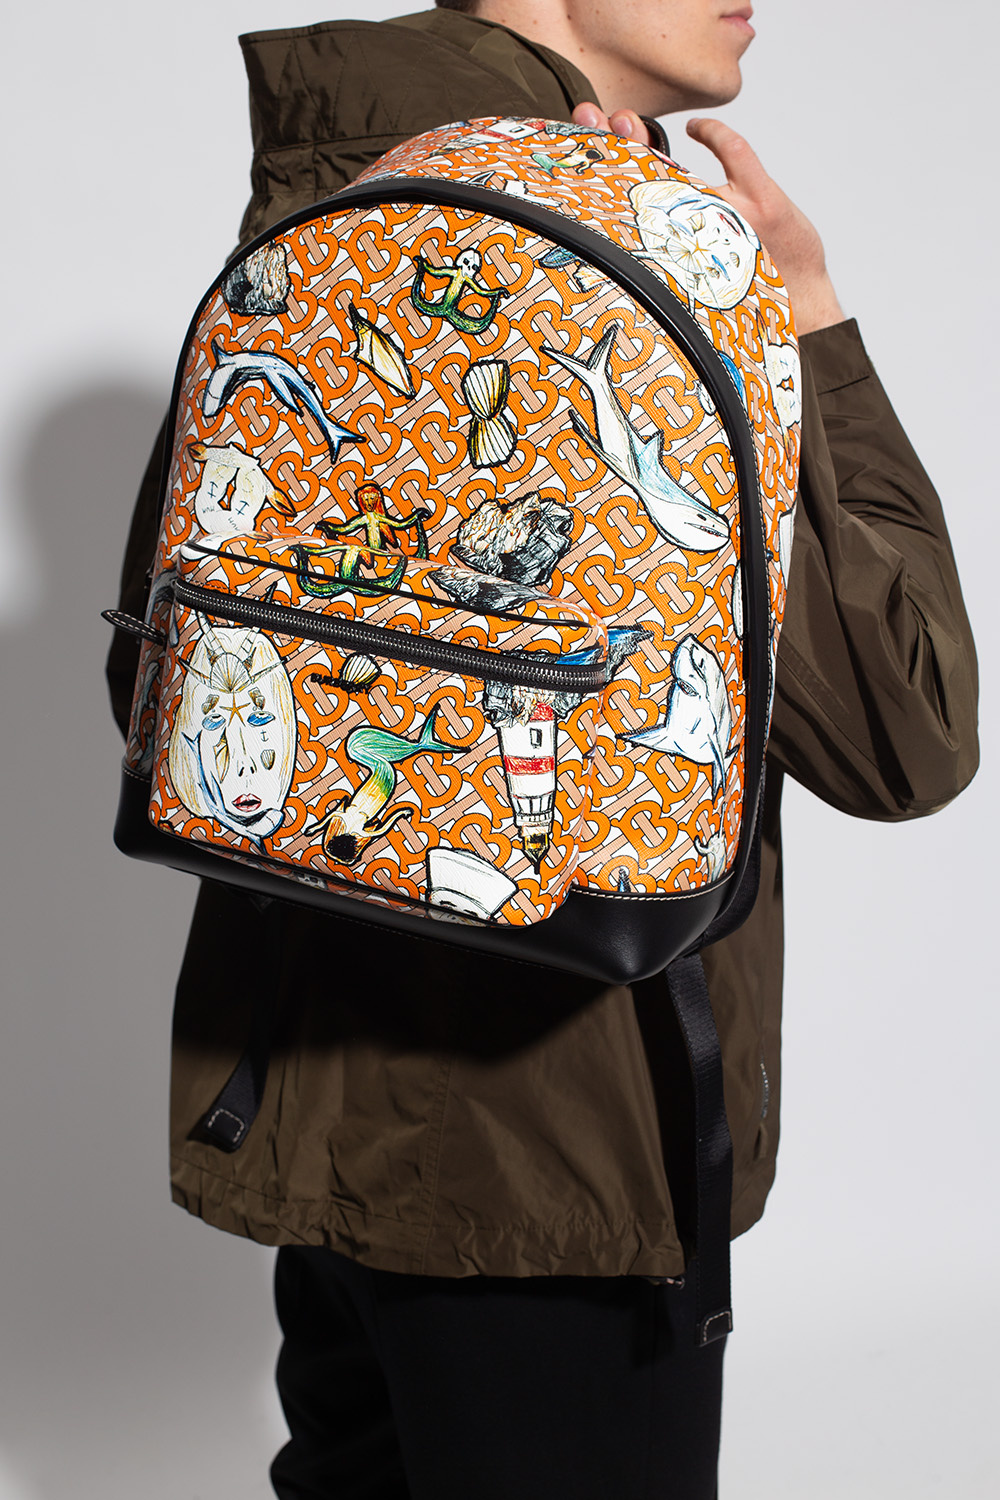 burberry Today Printed backpack